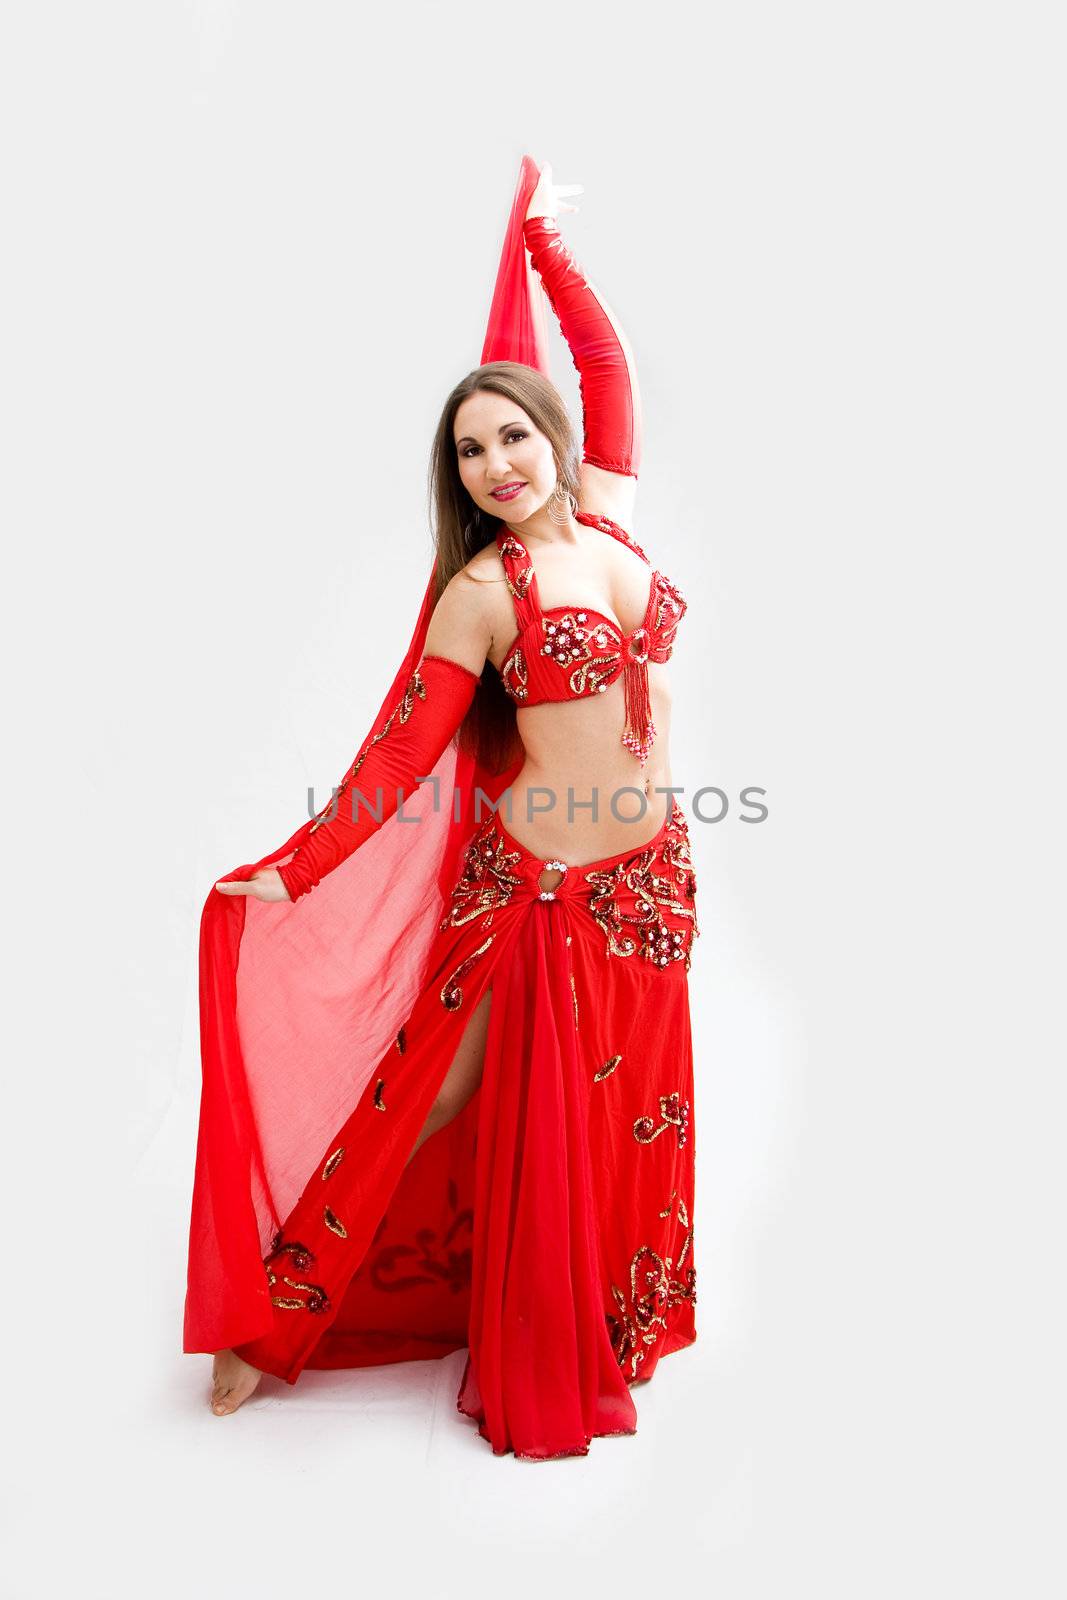 Beautiful belly dancer in red outfit holding veil, isolated